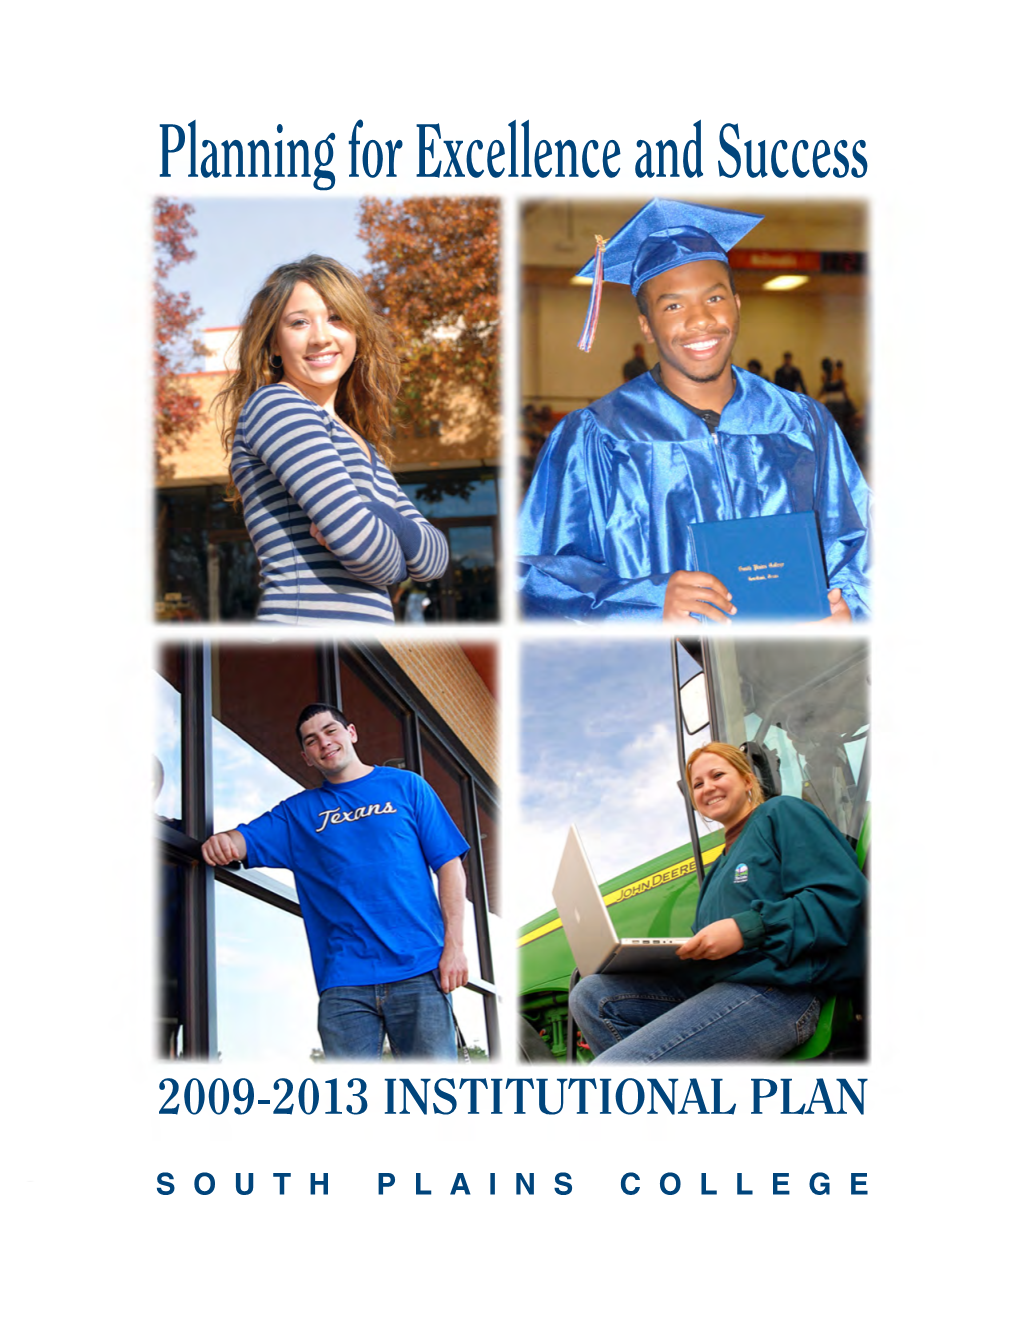 2009-2013 Institutional Plan: Planning for Excellence and Success